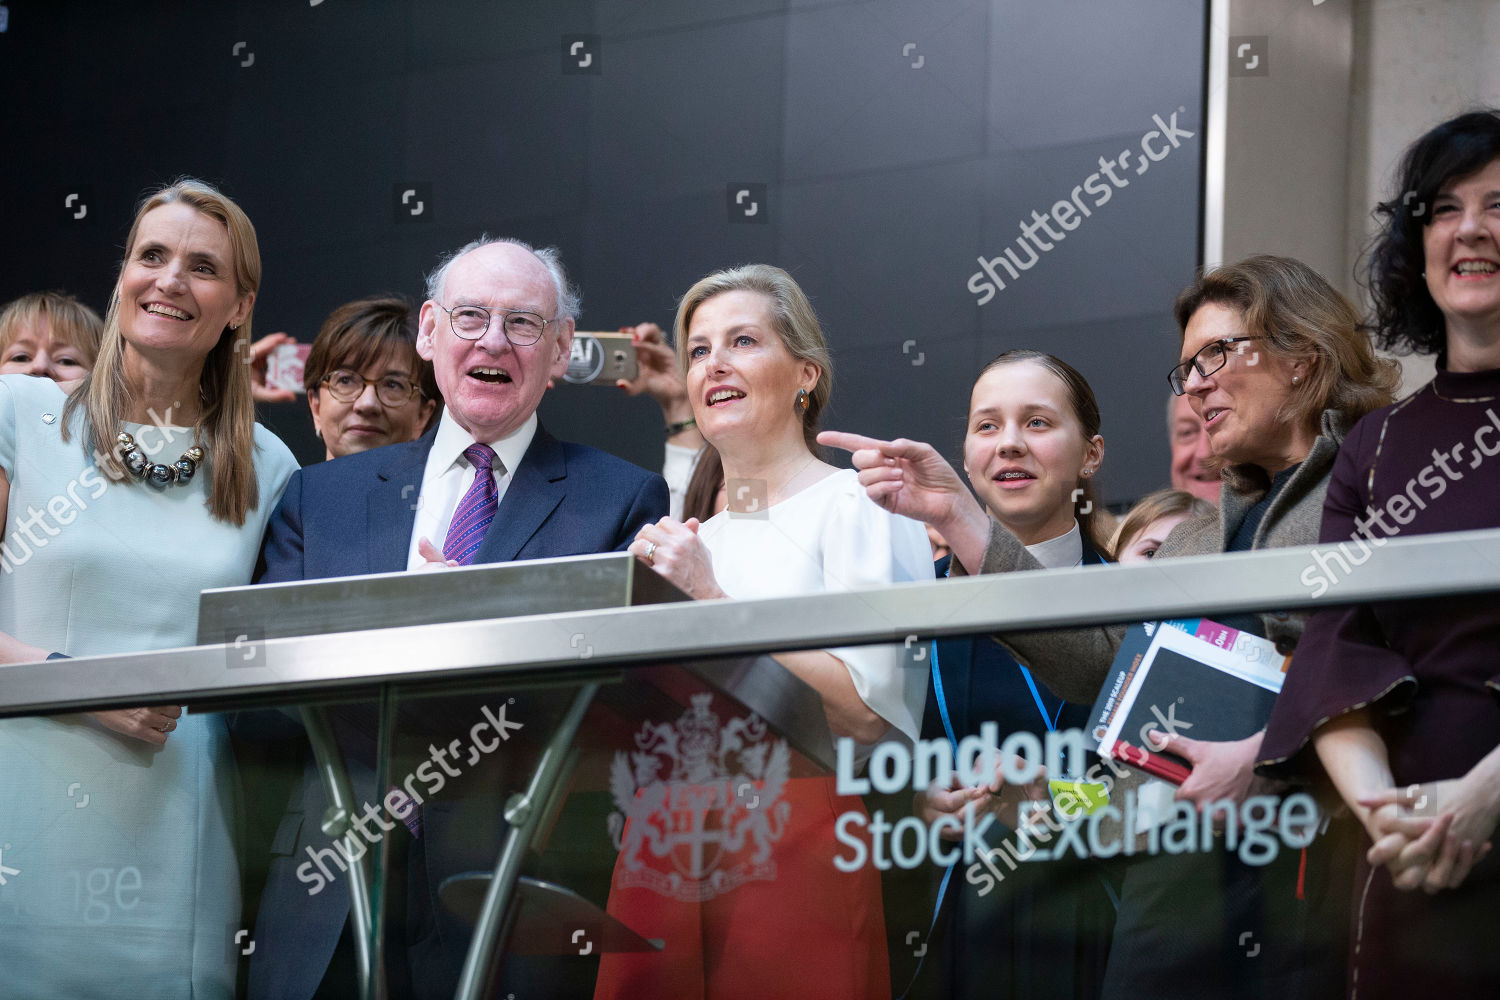 sophie-countess-of-wessex-attends-womens-network-forum-and-market-opening-ceremony-international-womens-day-london-uk-08-mar-2019-shutterstock-editorial-10147941ae.jpg